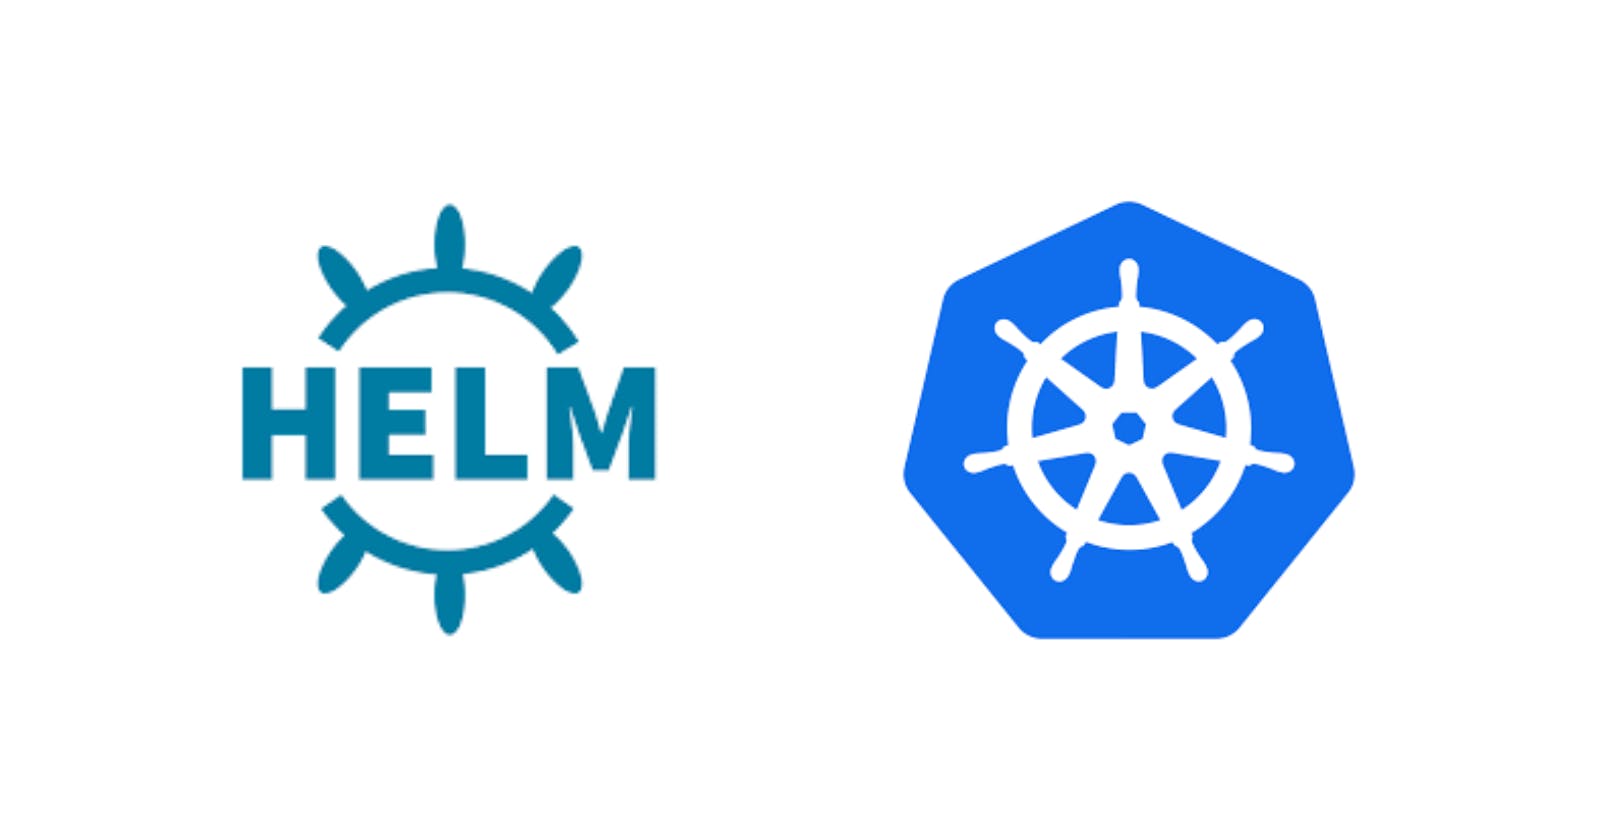 Building a Helm Chart for Microservices